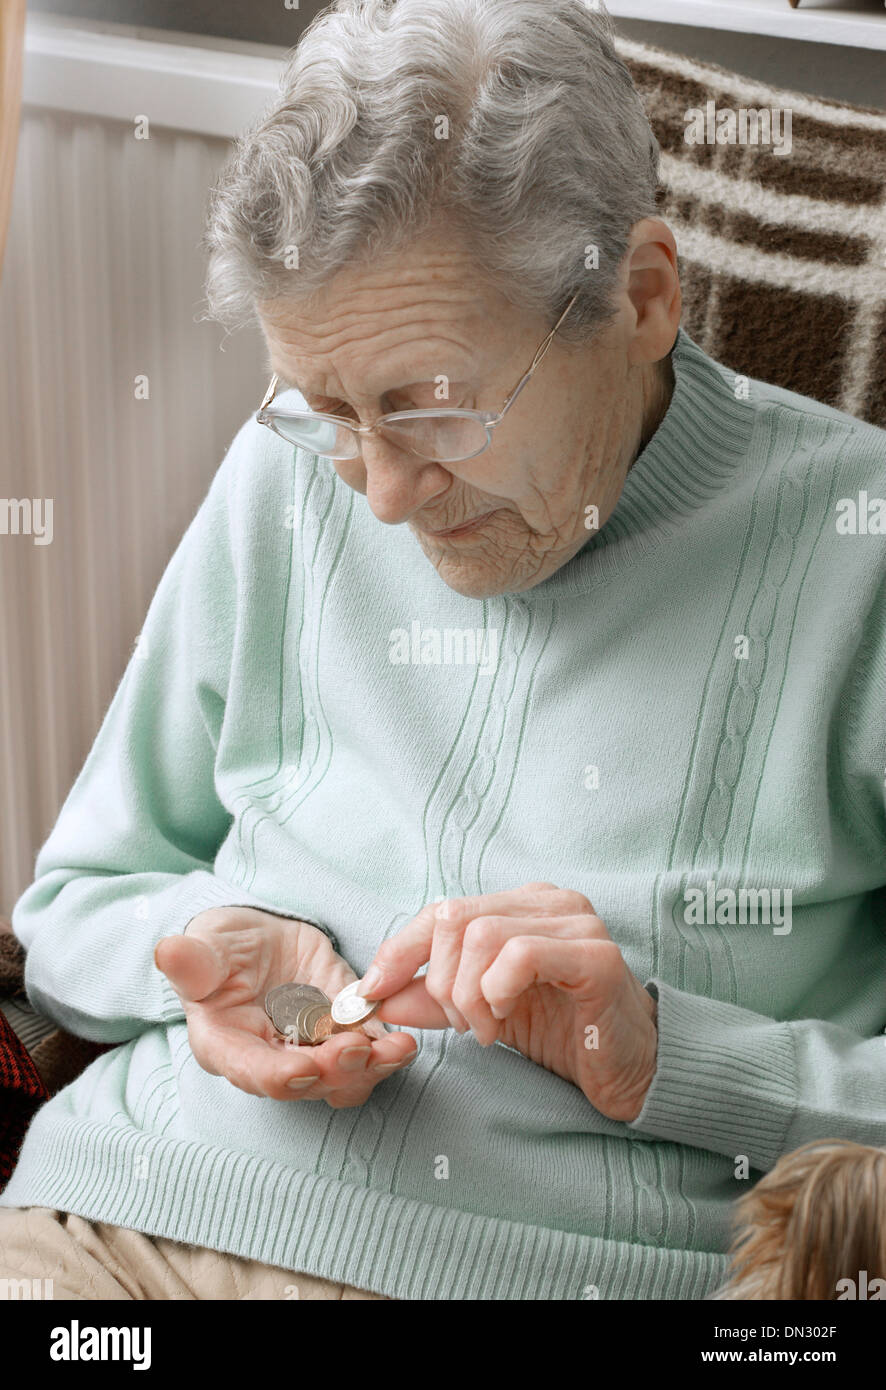 Elderly woman holding a mixture of coins (going through money in the age of austerity) Stock Photo